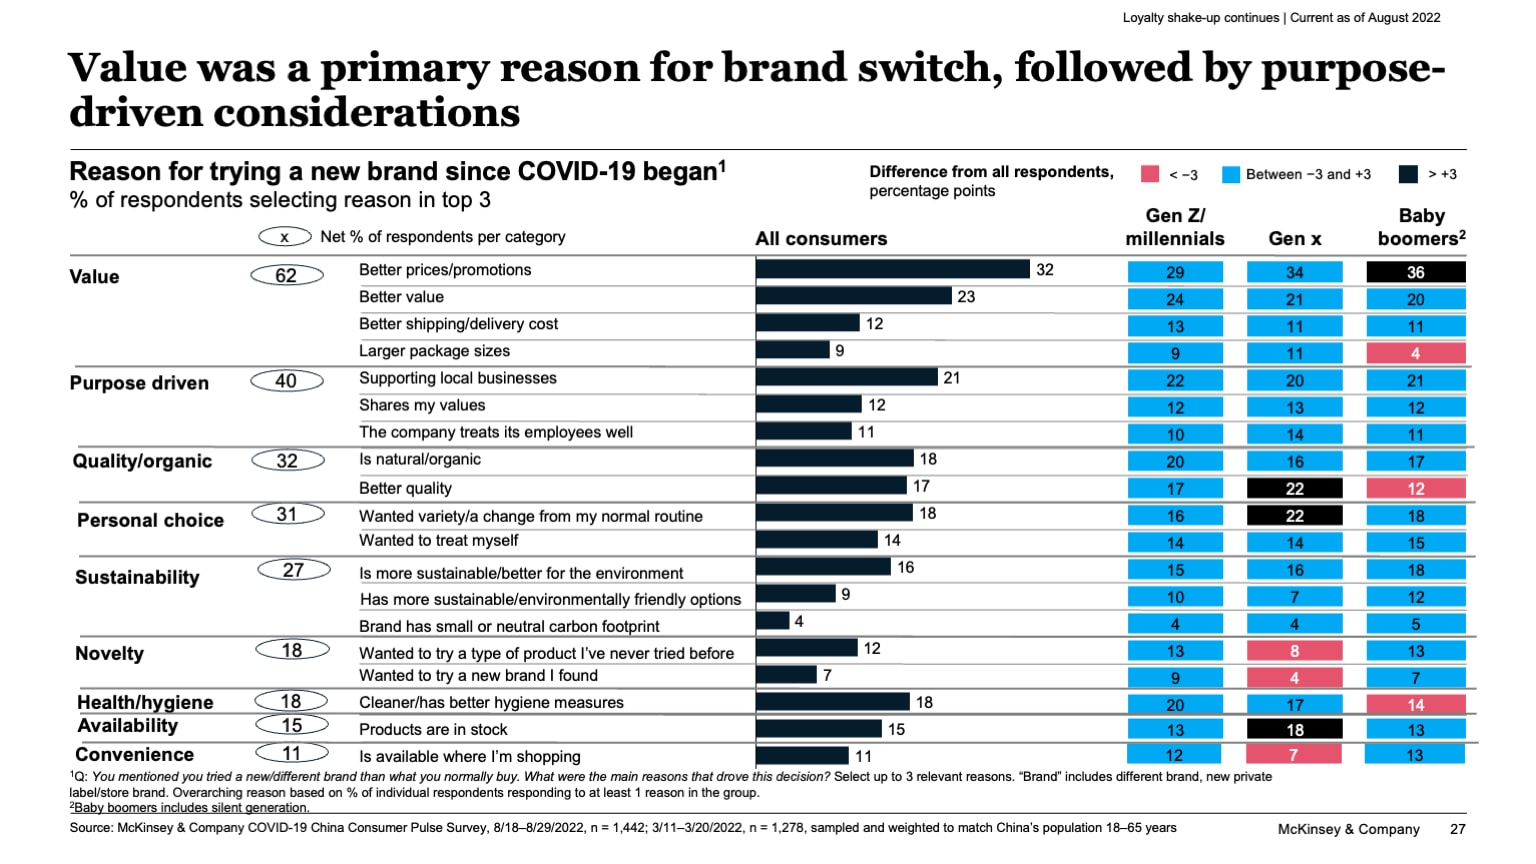 Value was a primary reason for brand switch, followed by purpose-driven considerations